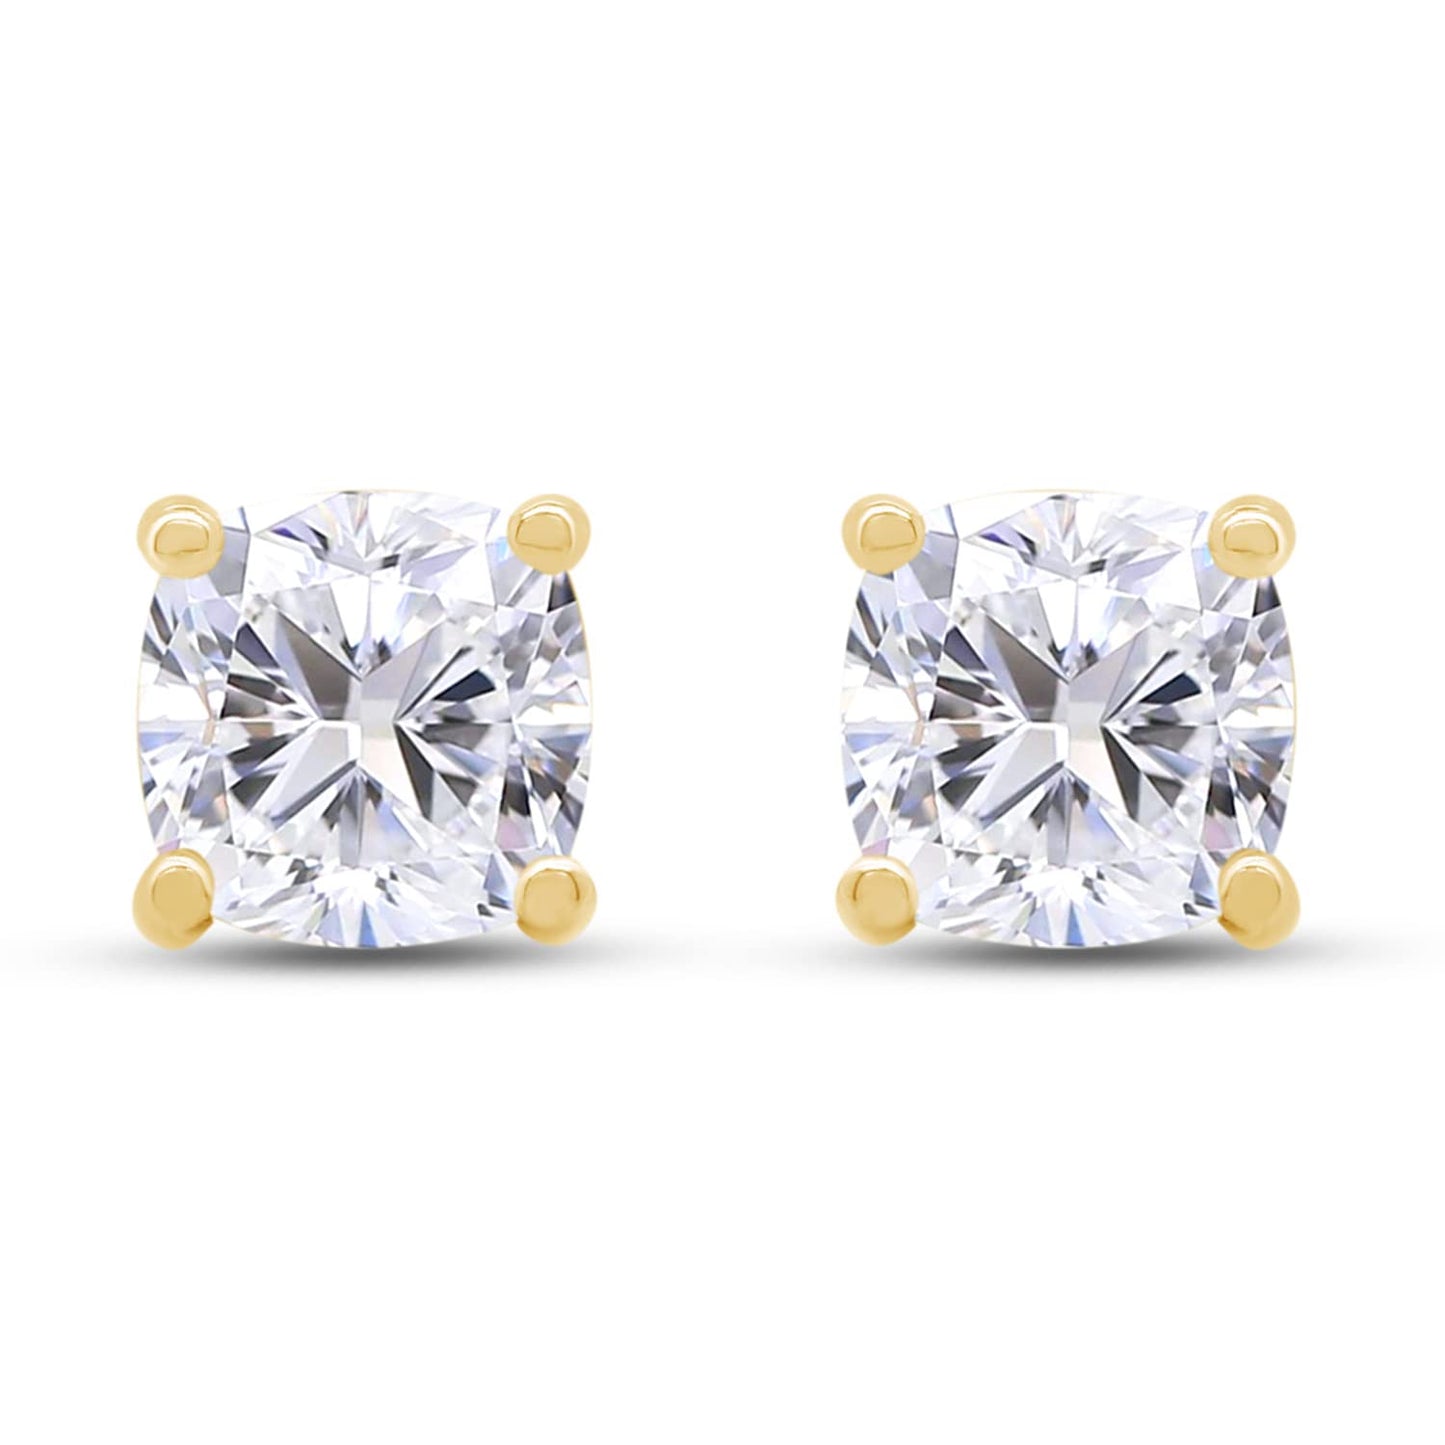 1 Carat Cushion Cut Lab Created Moissanite Diamond Push Back Solitaire Stud Earrings In 925 Sterling Silver (1 Cttw)